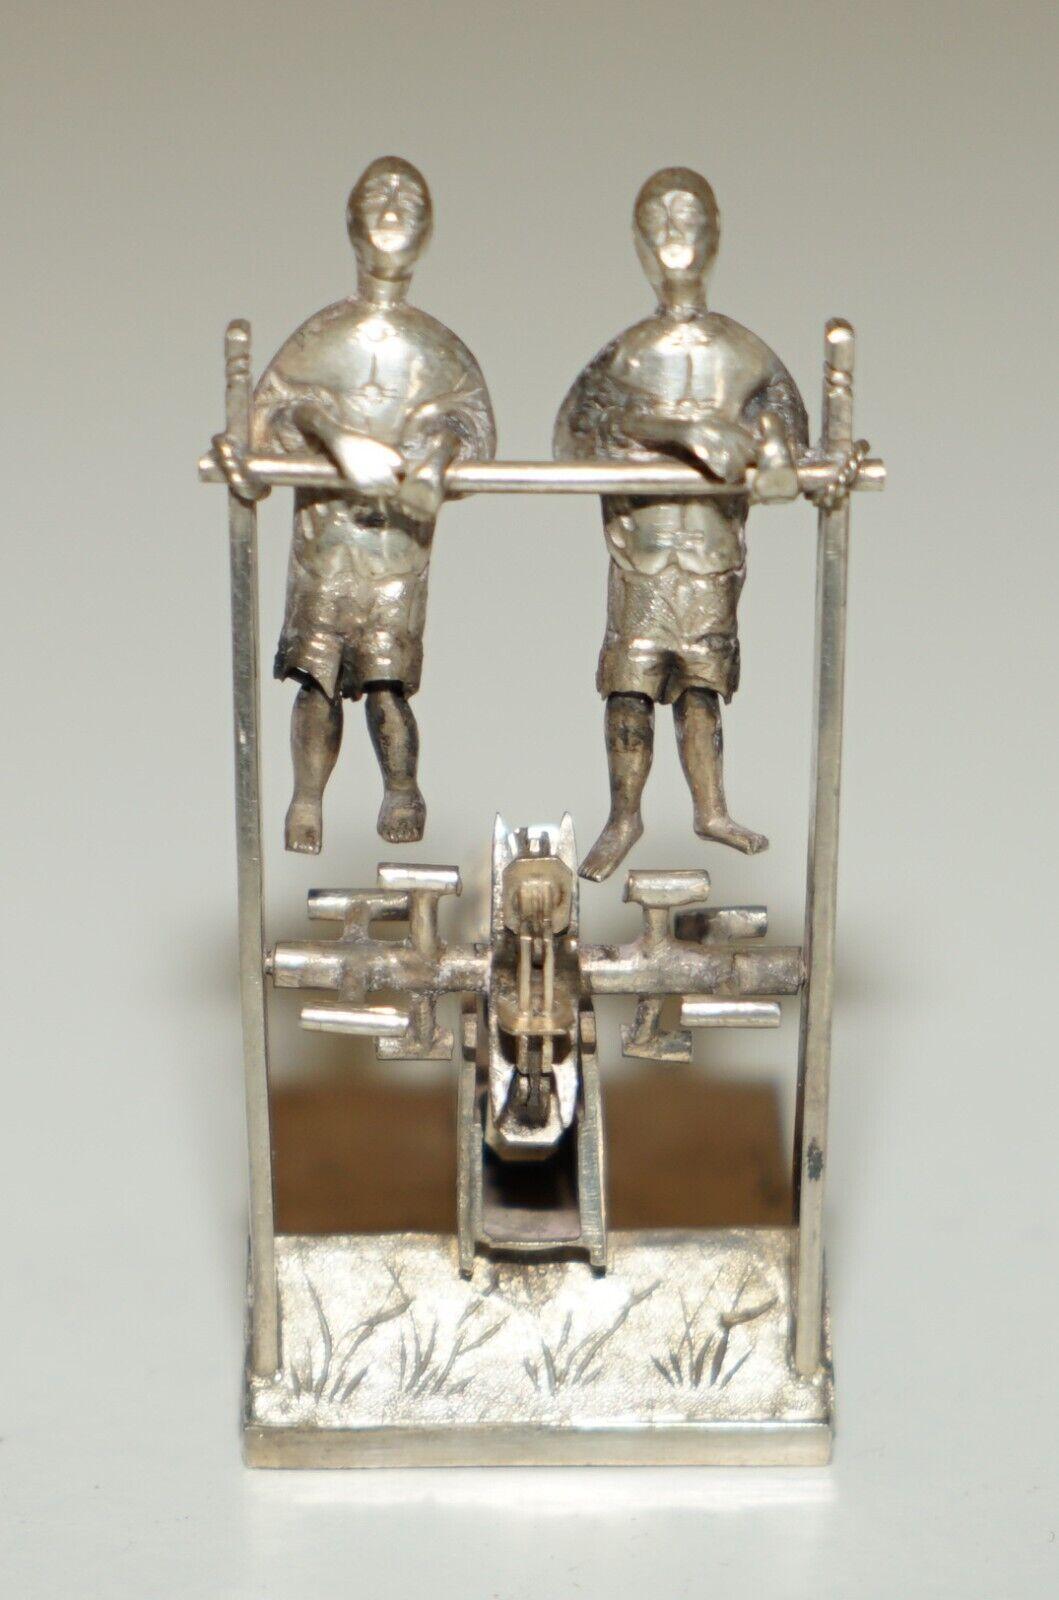 High Victorian ANTIQUE CIRCA 1890 CHINESE STERLiNG SILVER STATUE OF MEN PEDDLING WITH A CHAIN For Sale